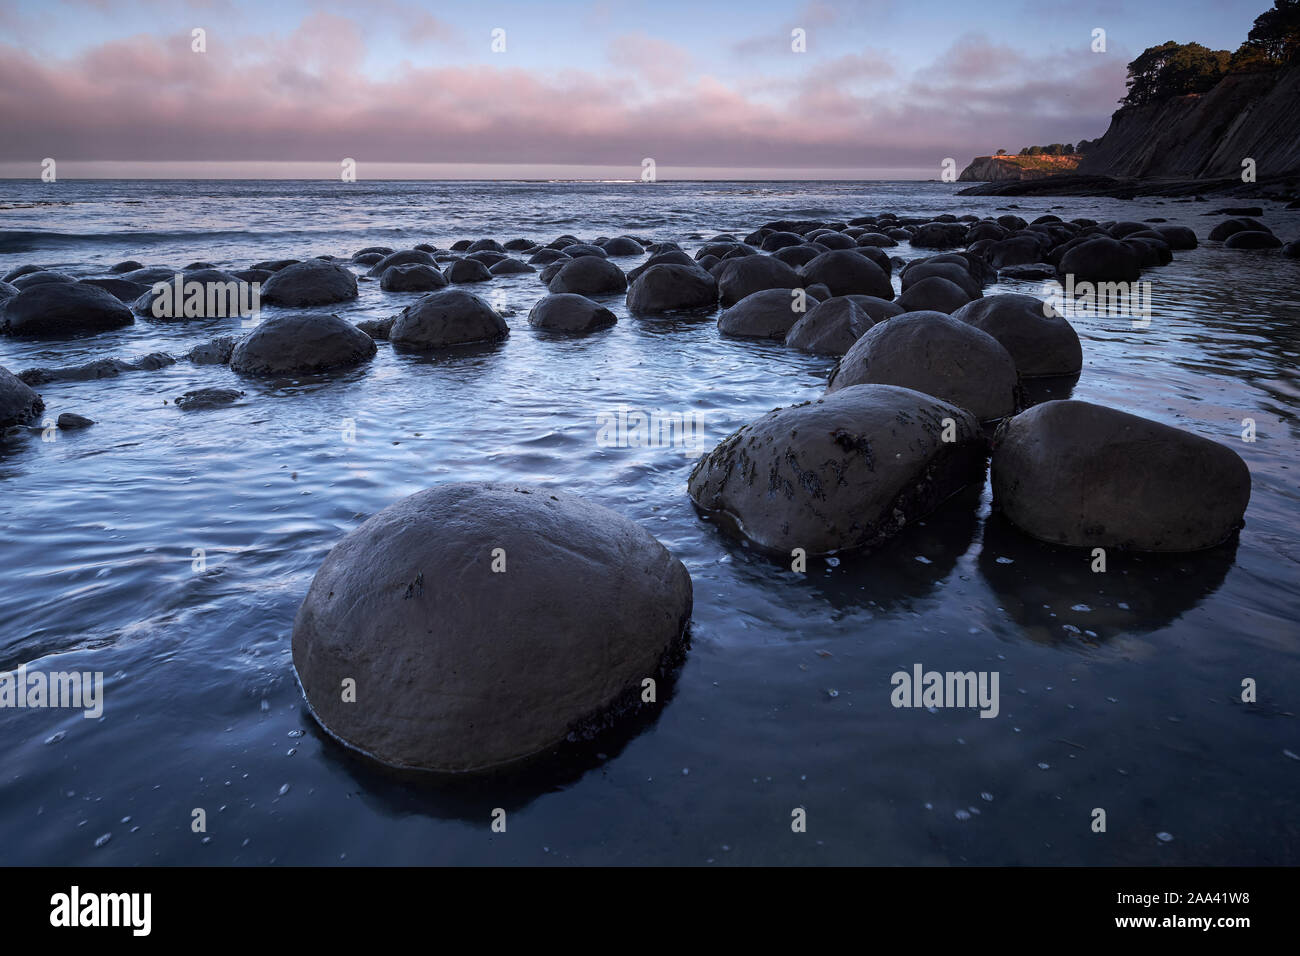 Rock formations in the Pacific Ocean at Bowling Ball Beach, California, USA Stock Photo